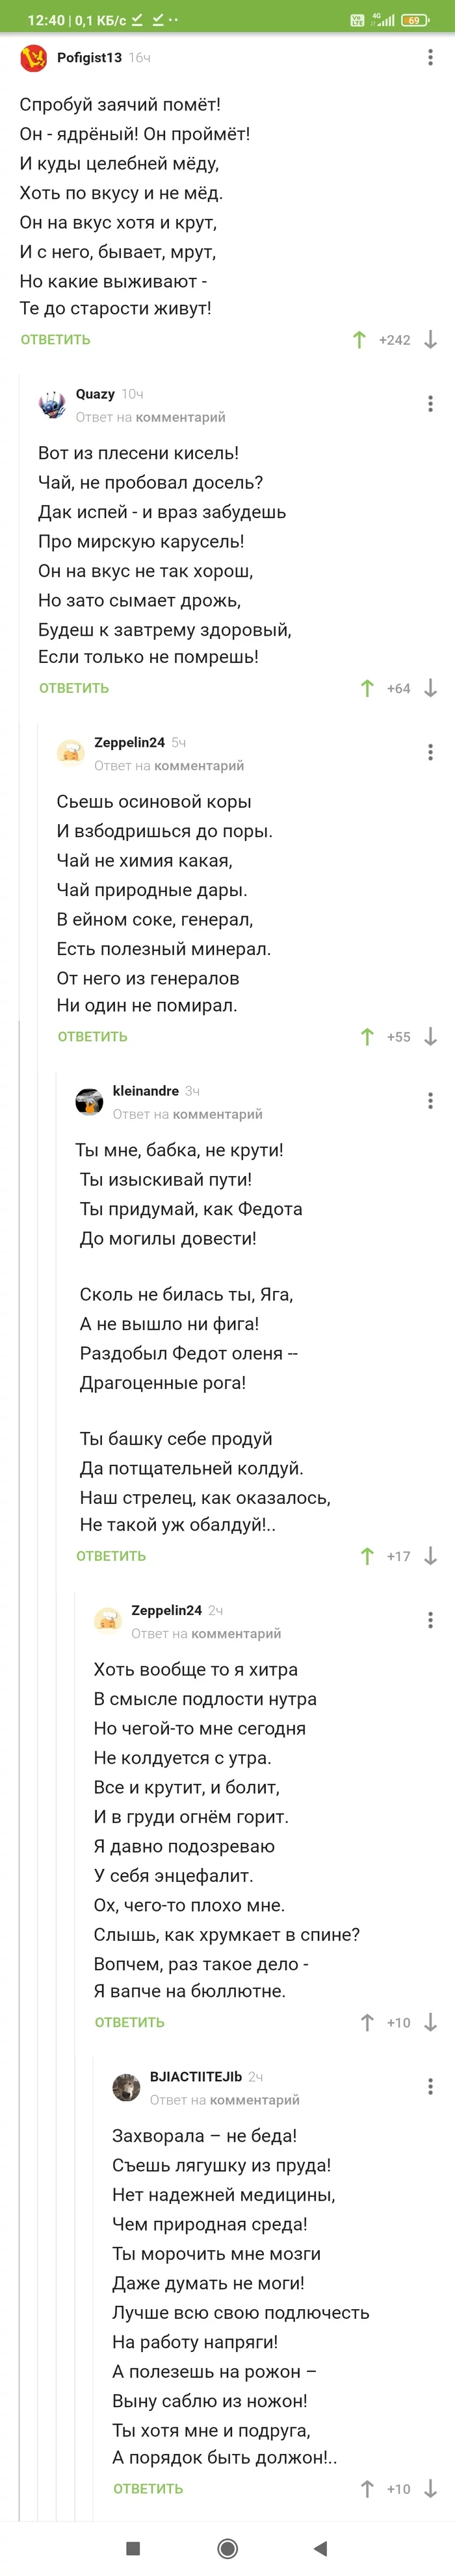 Can I have another traditional medicine? - Comments on Peekaboo, Screenshot, Longpost, About Fedot the Archer, Leonid Filatov, Repeat